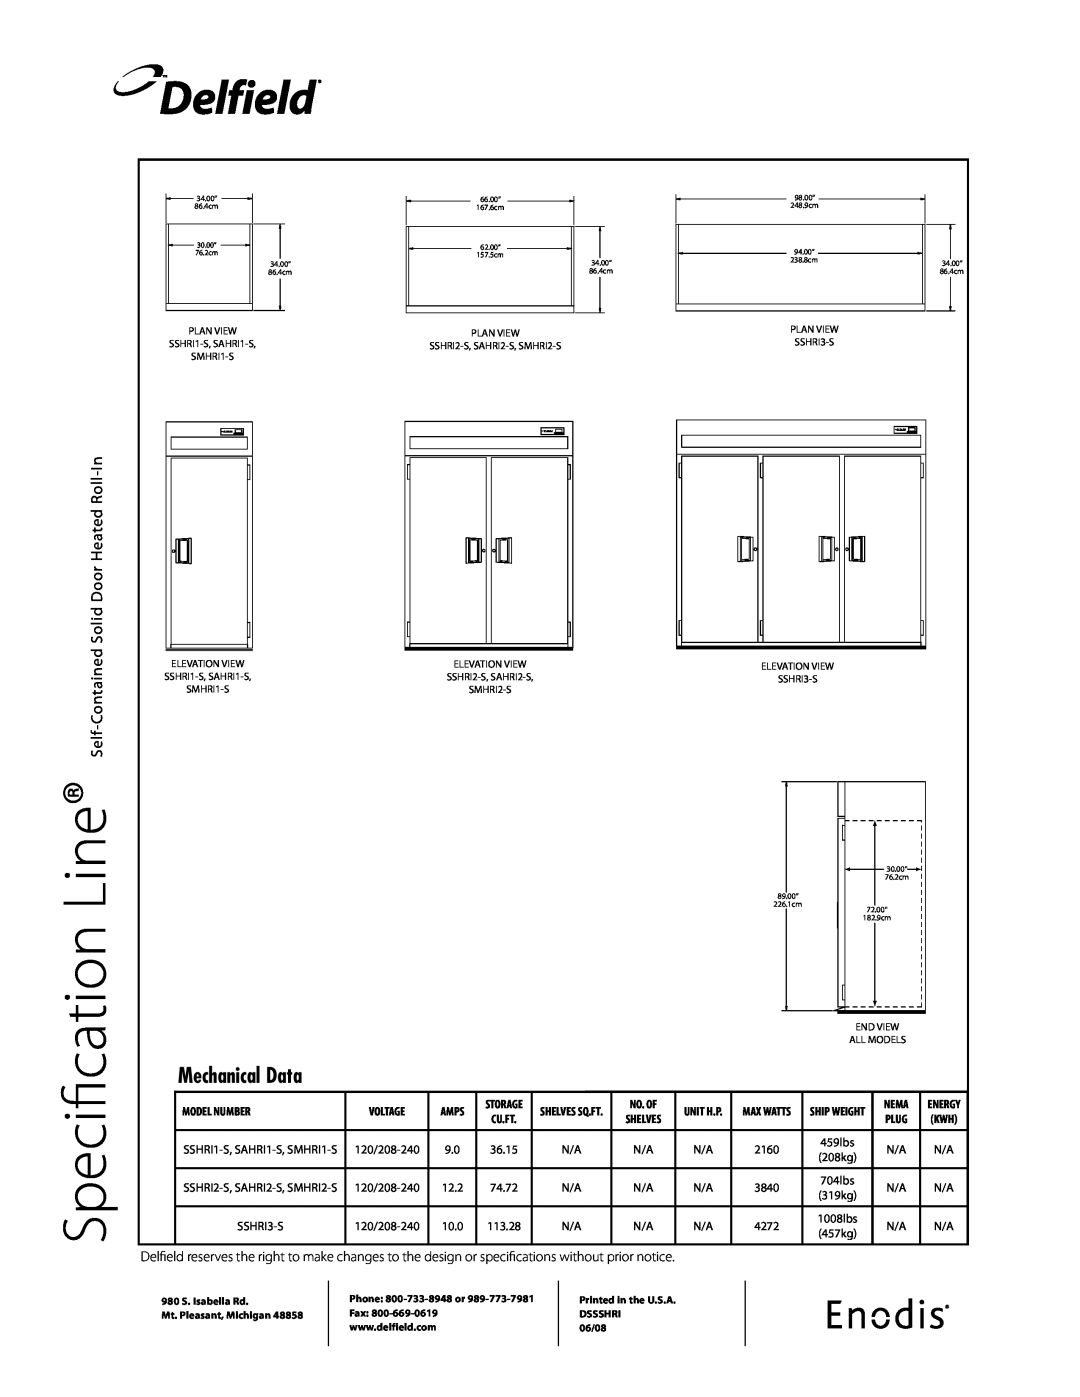 Delfield SSHRI-S Specification, Delfield, Mechanical Data, Line Self-Contained Solid Door Heated Roll-In, Model Number 